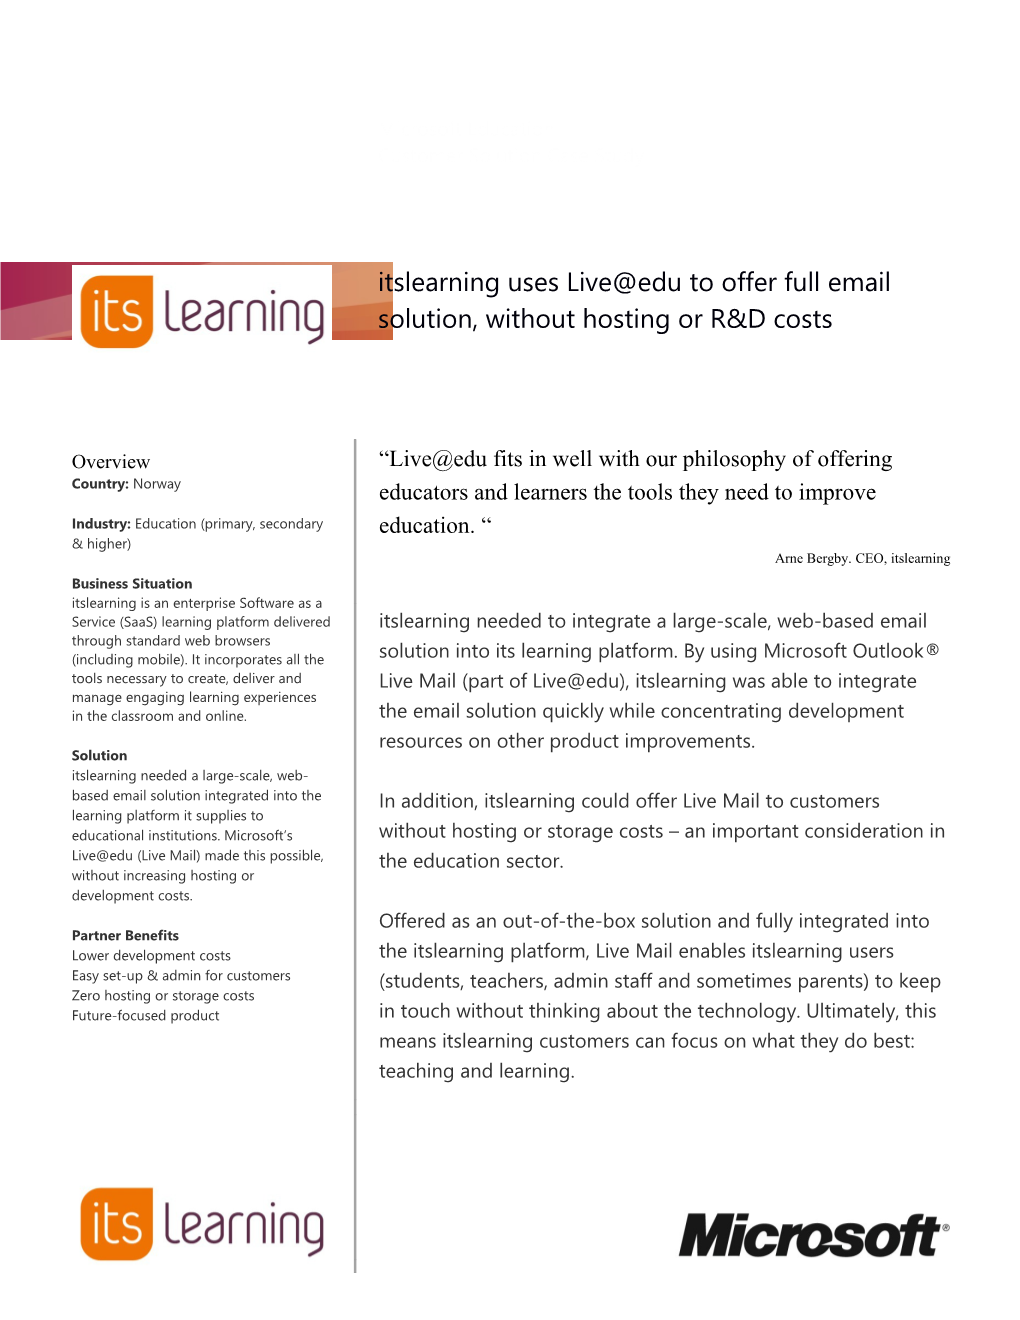 Metia CEP Itslearning Demonstrates Business Success with Live Edu, a License-Free Technology